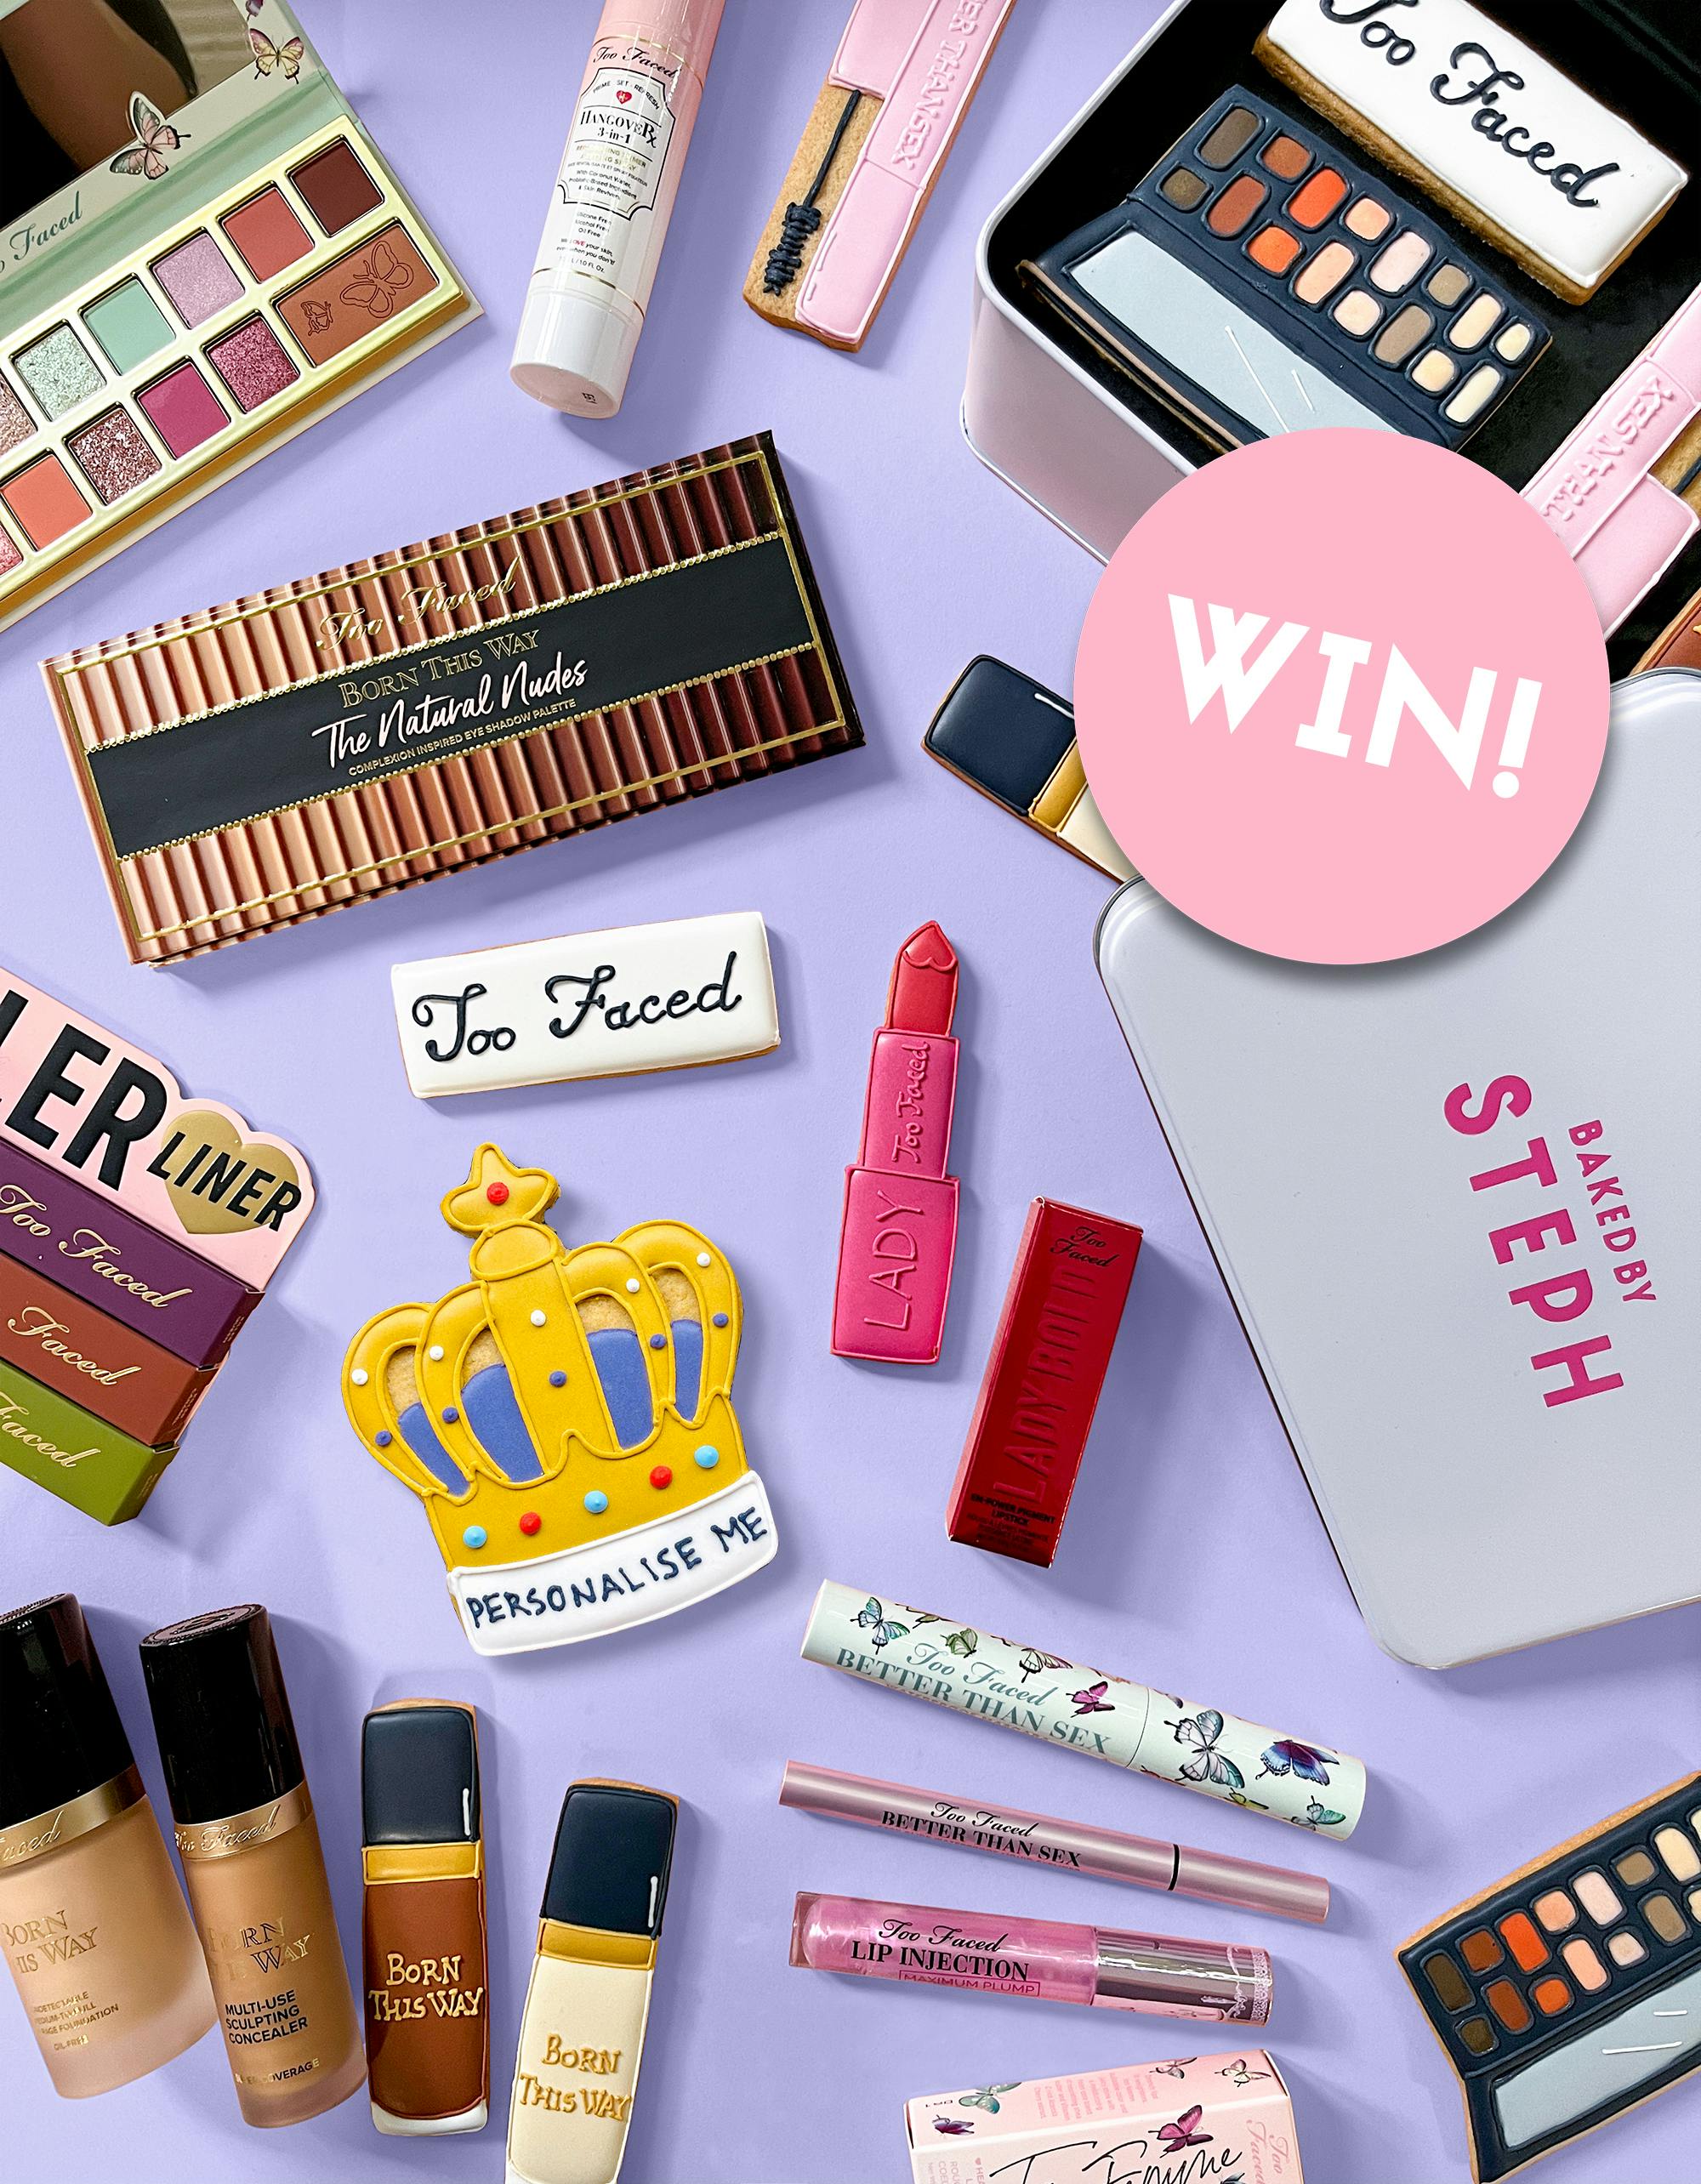 Instagram Giveaway! Too Faced x Baked By Steph